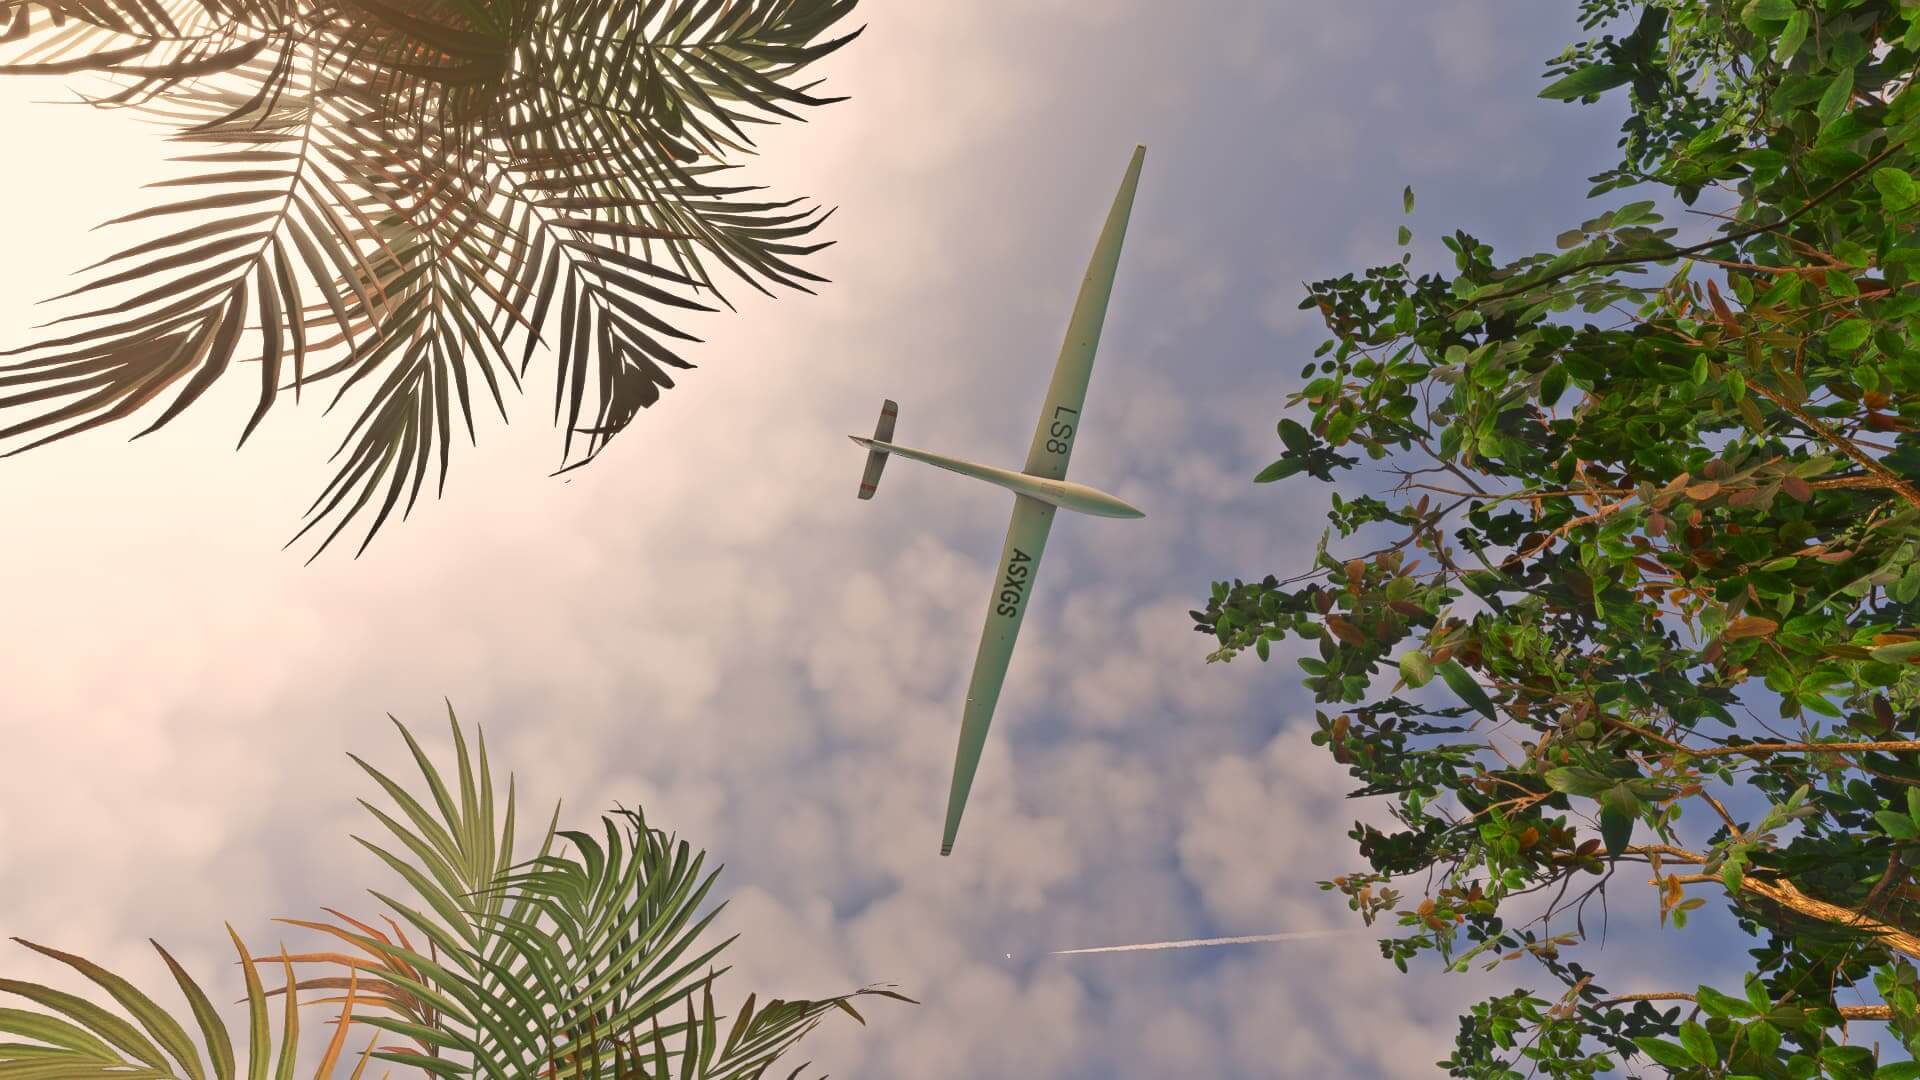 Bottom up view of a glider flying over some tropical foliage.